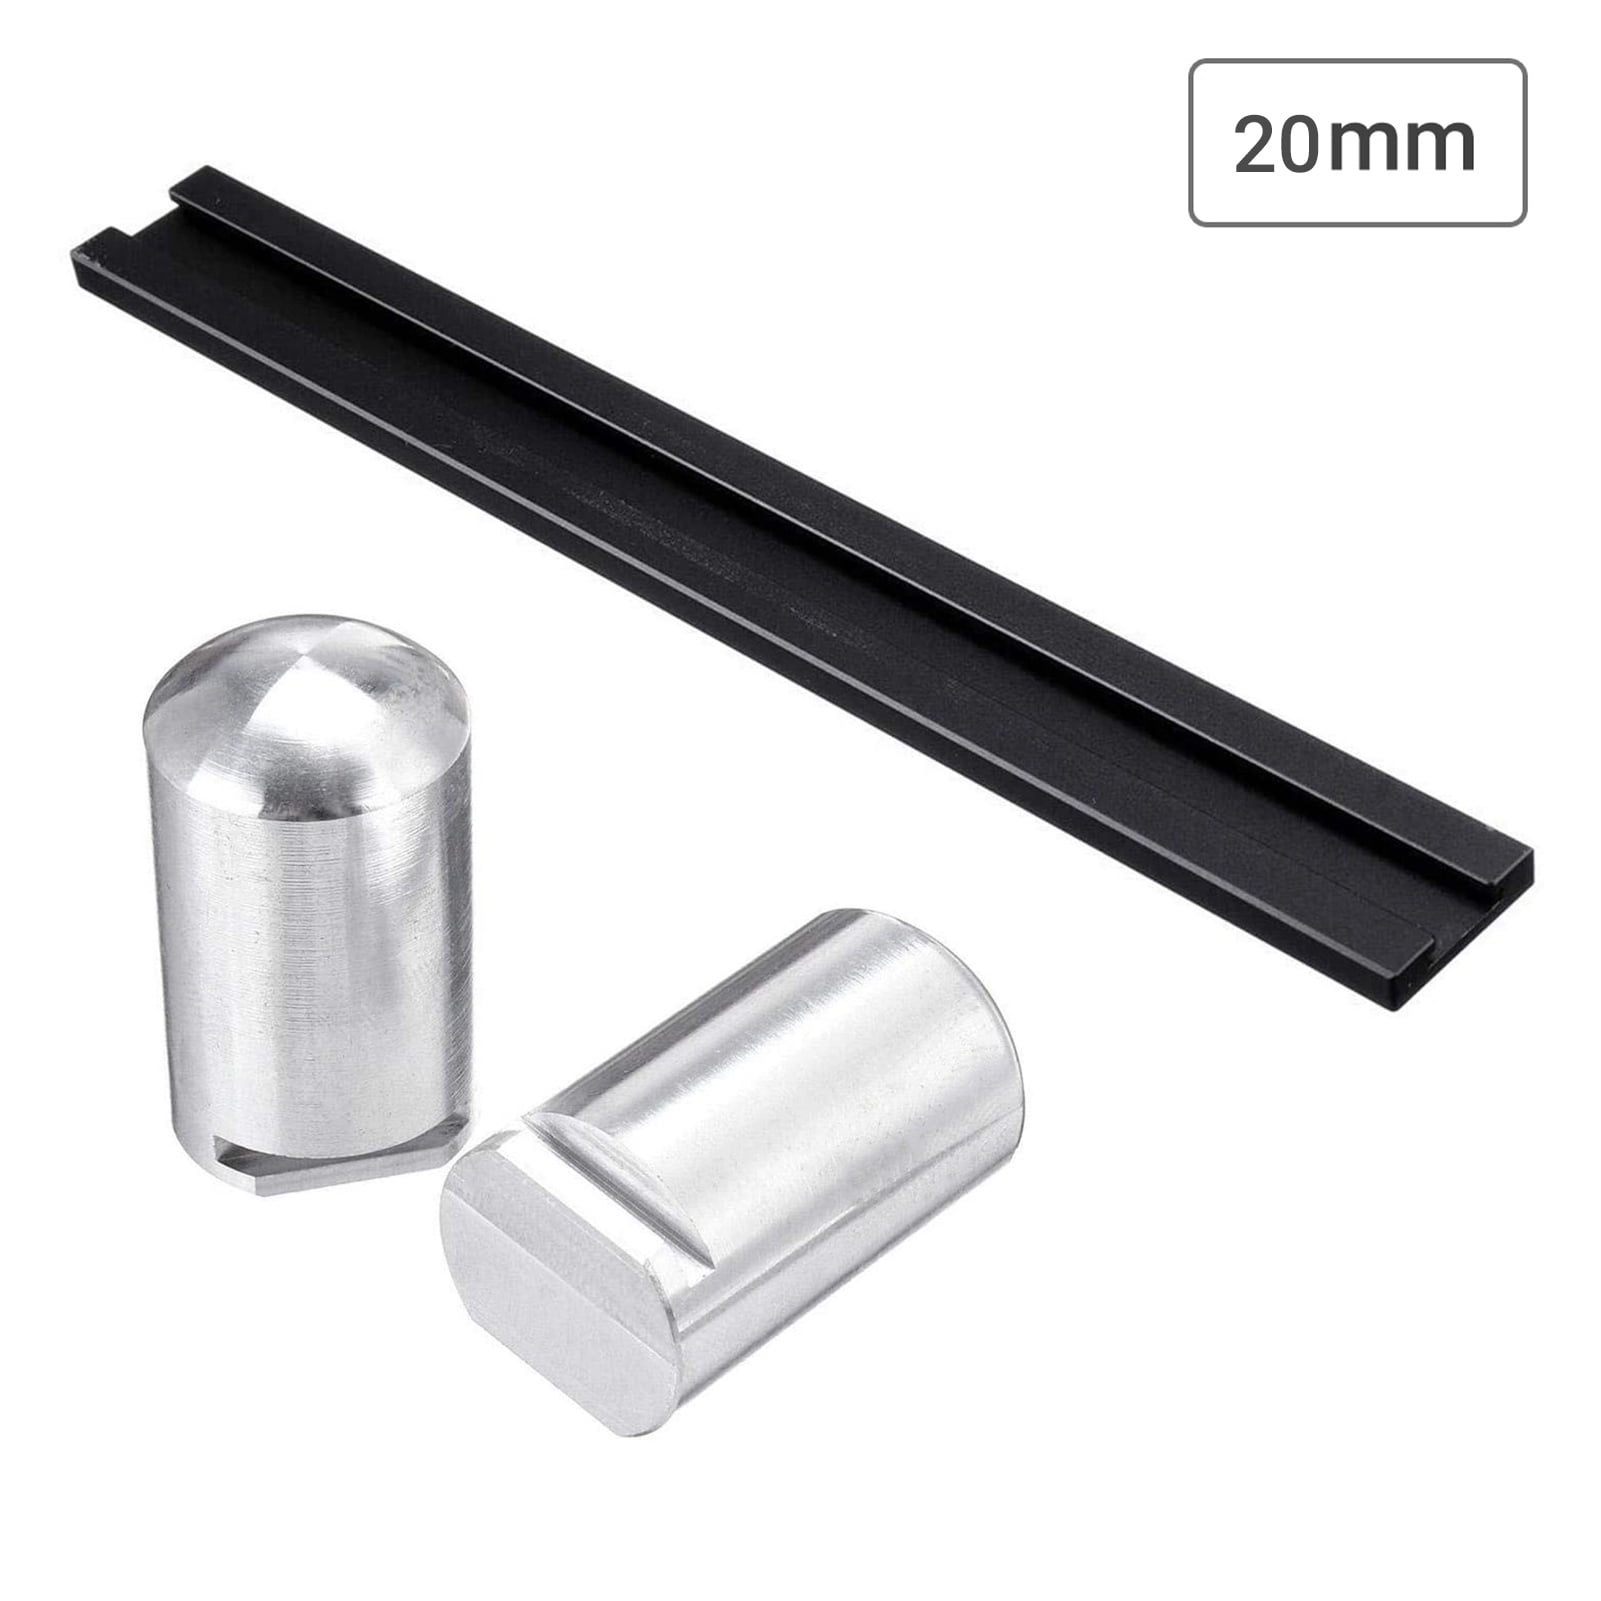 2 Pack Woodworking Planing Stop Bench Dogs Clamp 19 mm Hole 19/20mm Dog Hole Bench Dogs Clamp Workbench for T-Track Woodworking DIY Table Workbench Positioning Bench Planing Stop Baffle